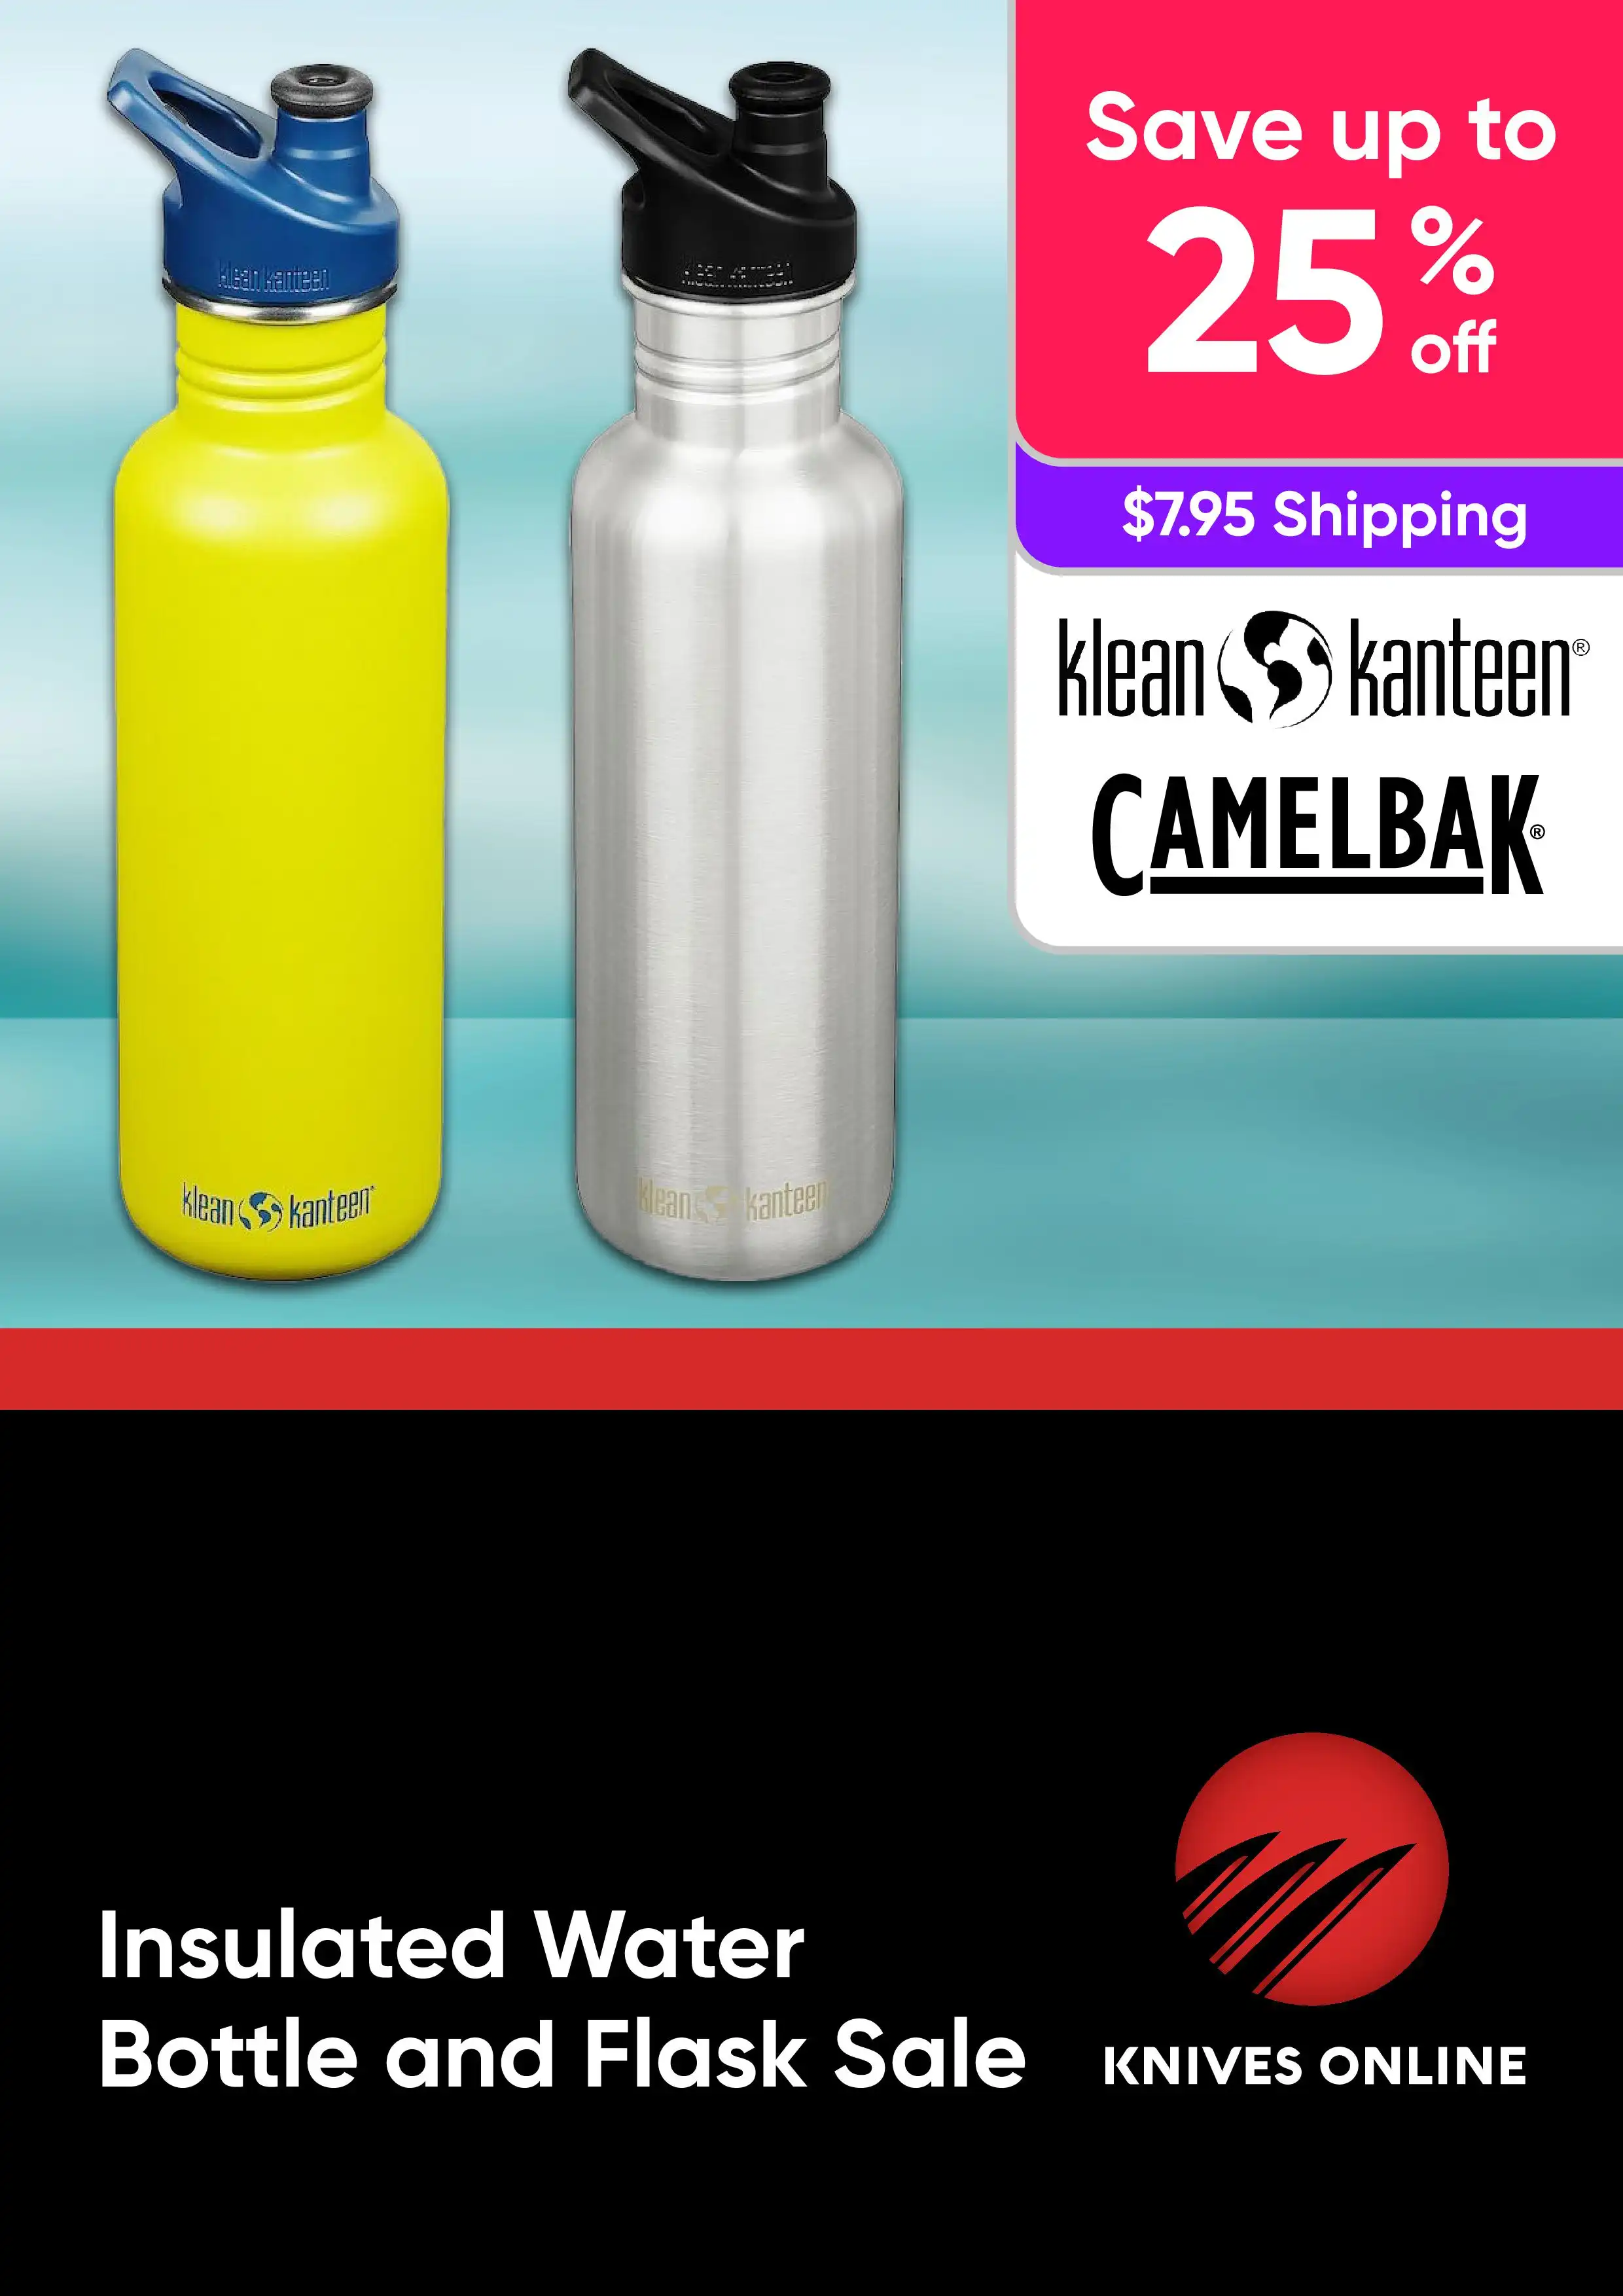 Insulated Water Bottle and Flask Sale - Klean Kanteen, Camelbak - Up to 25% off